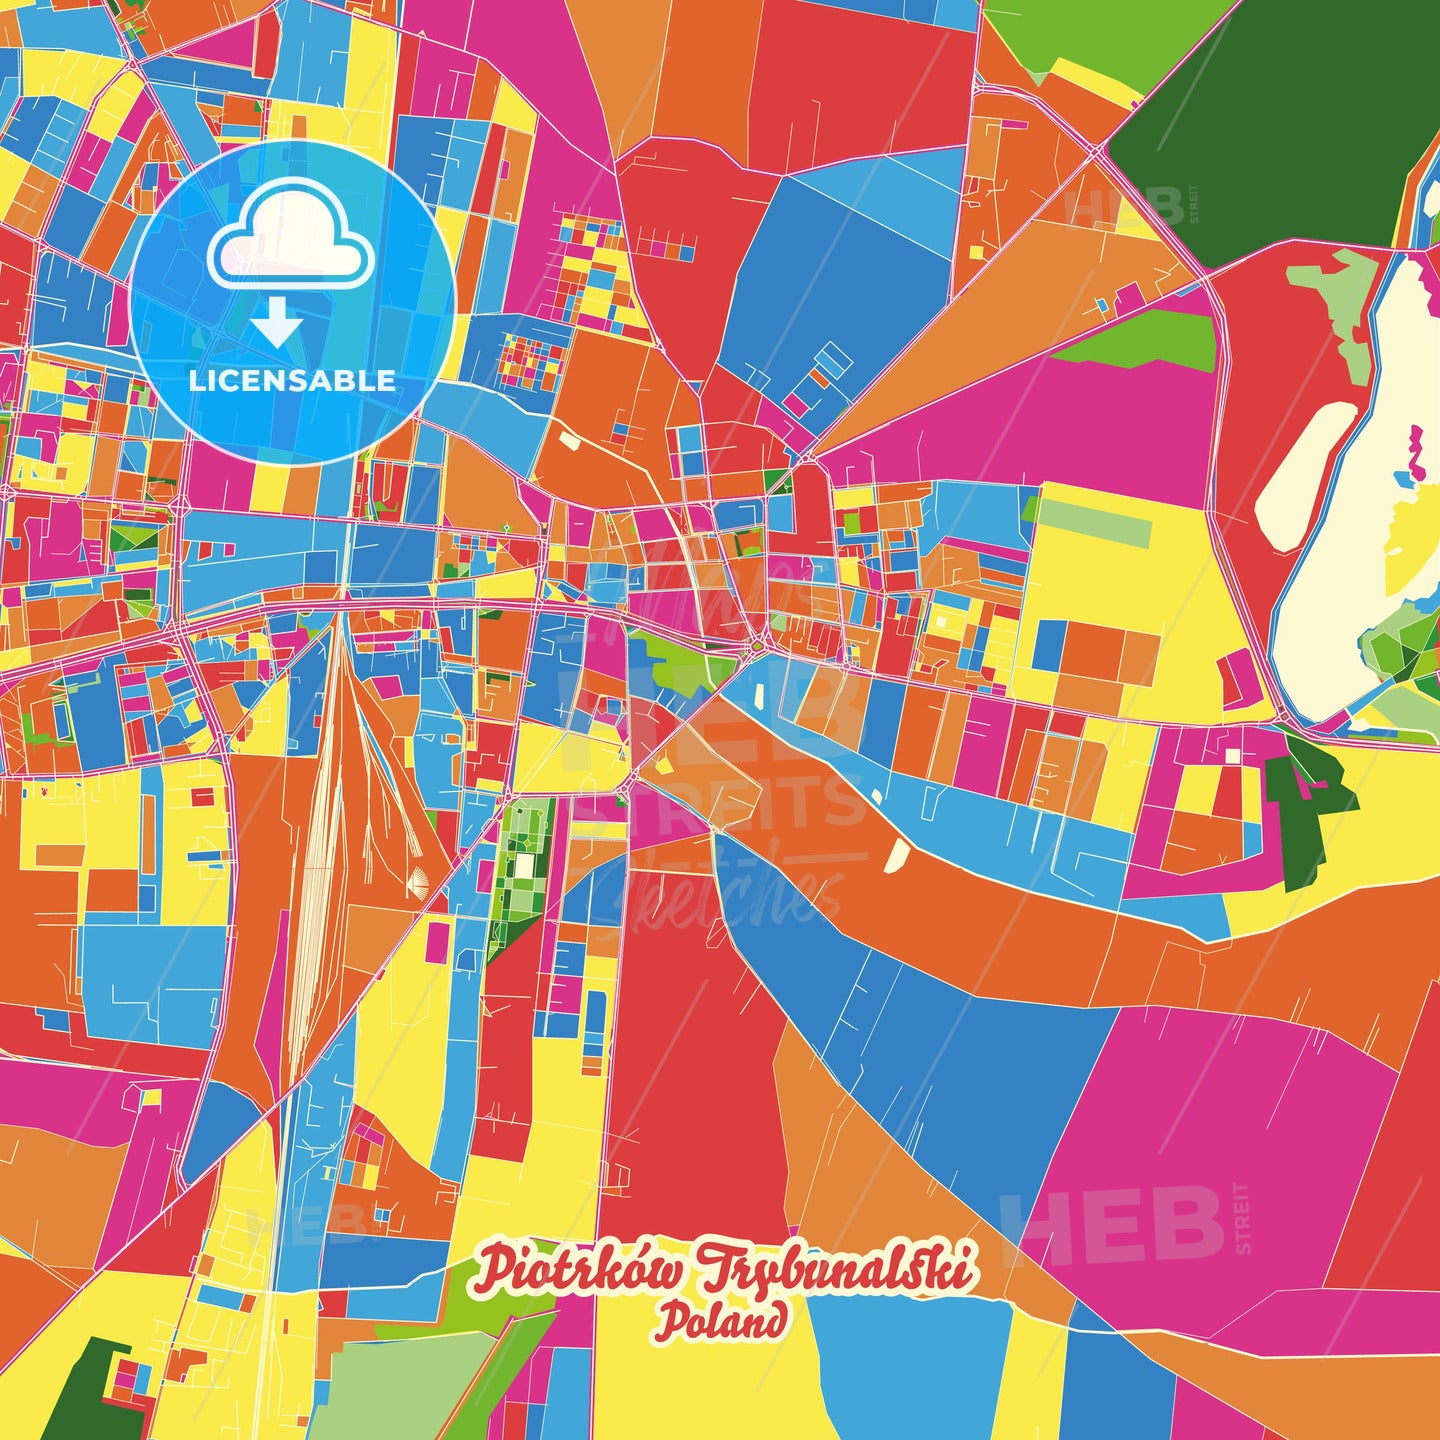 Piotrków Trybunalski, Poland Crazy Colorful Street Map Poster Template - HEBSTREITS Sketches